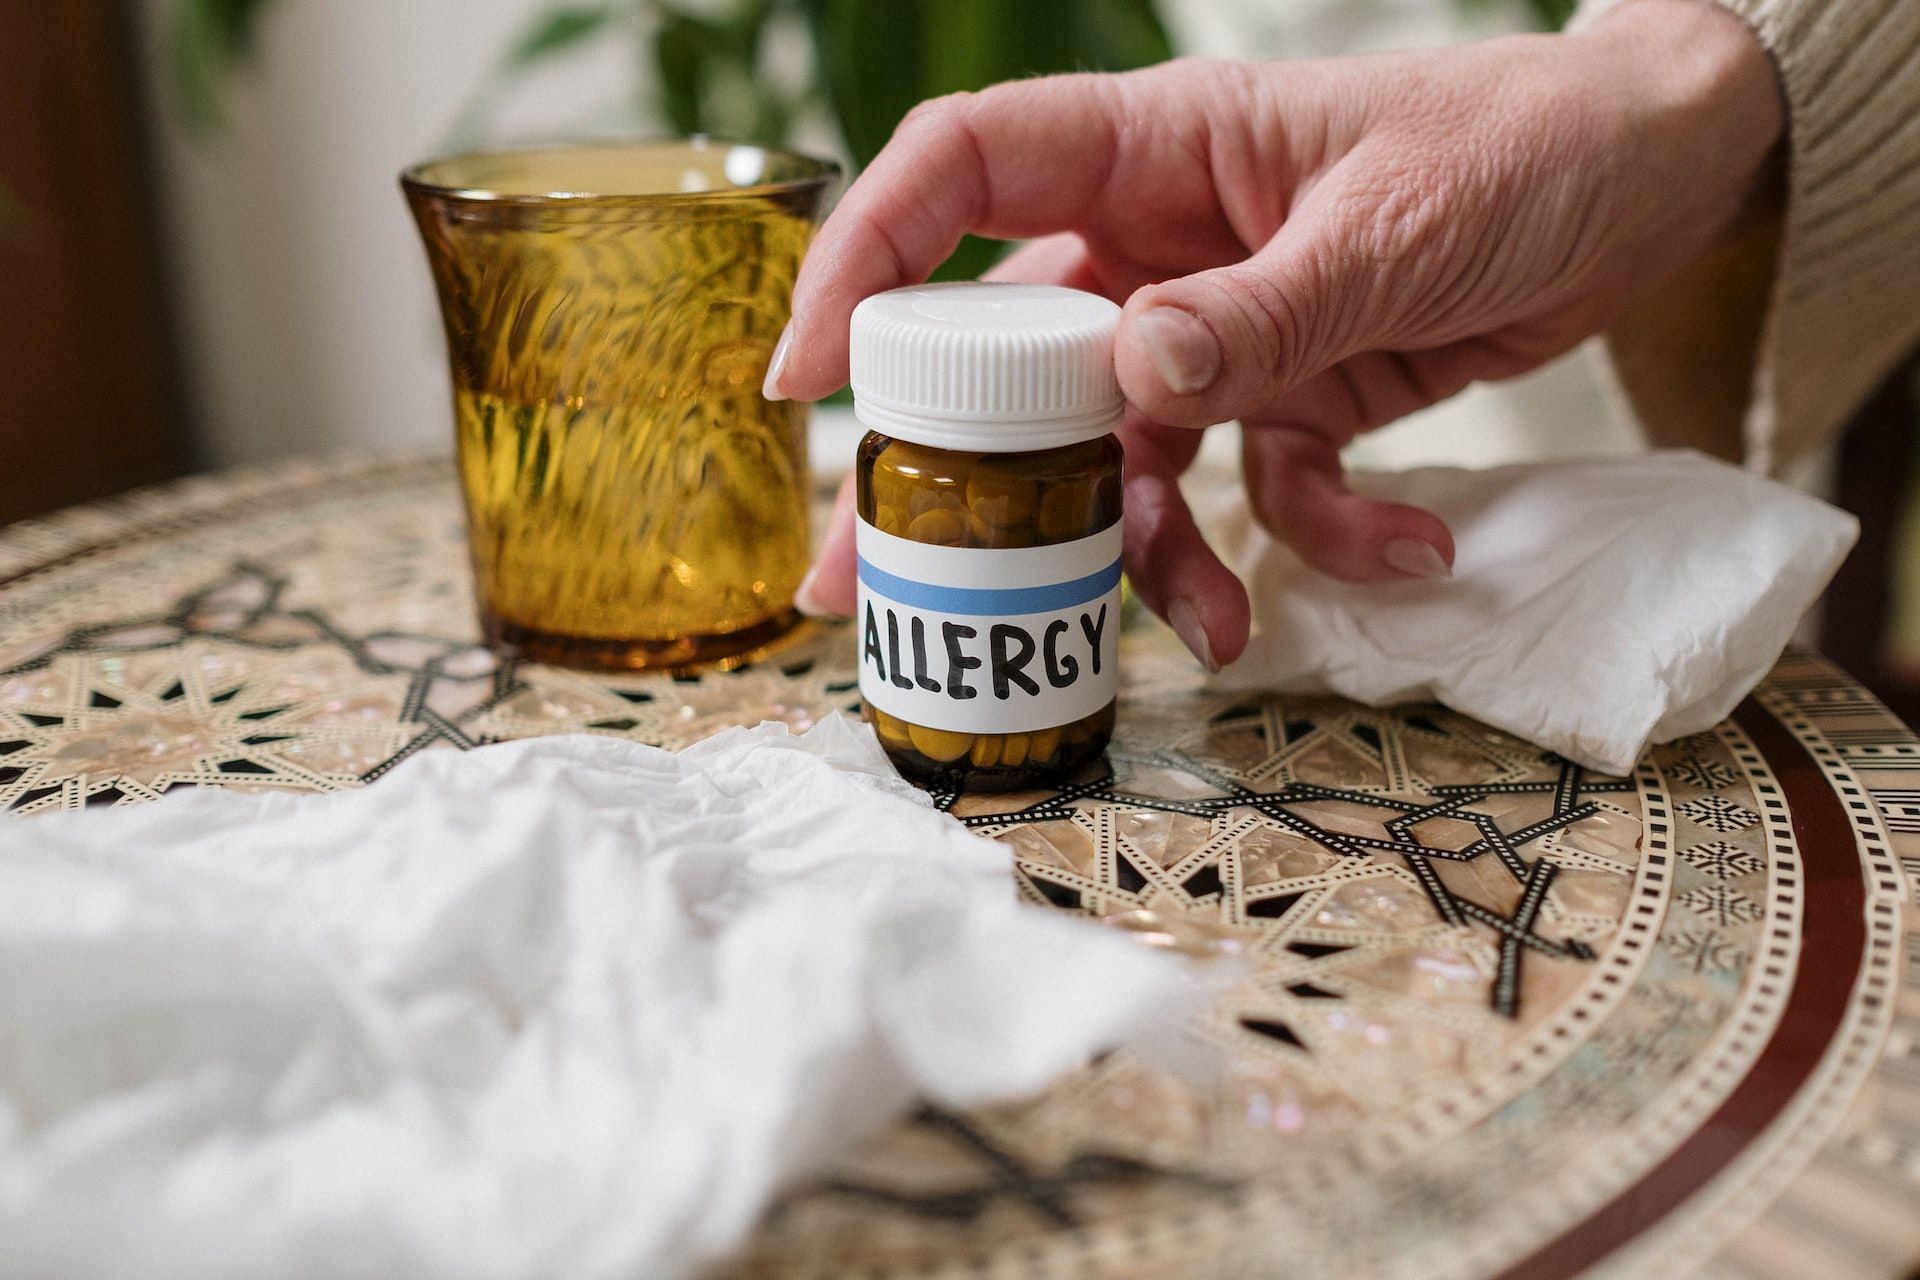 Allergy medications can prevent itching. (Photo via Pexels/cottonbro studio)